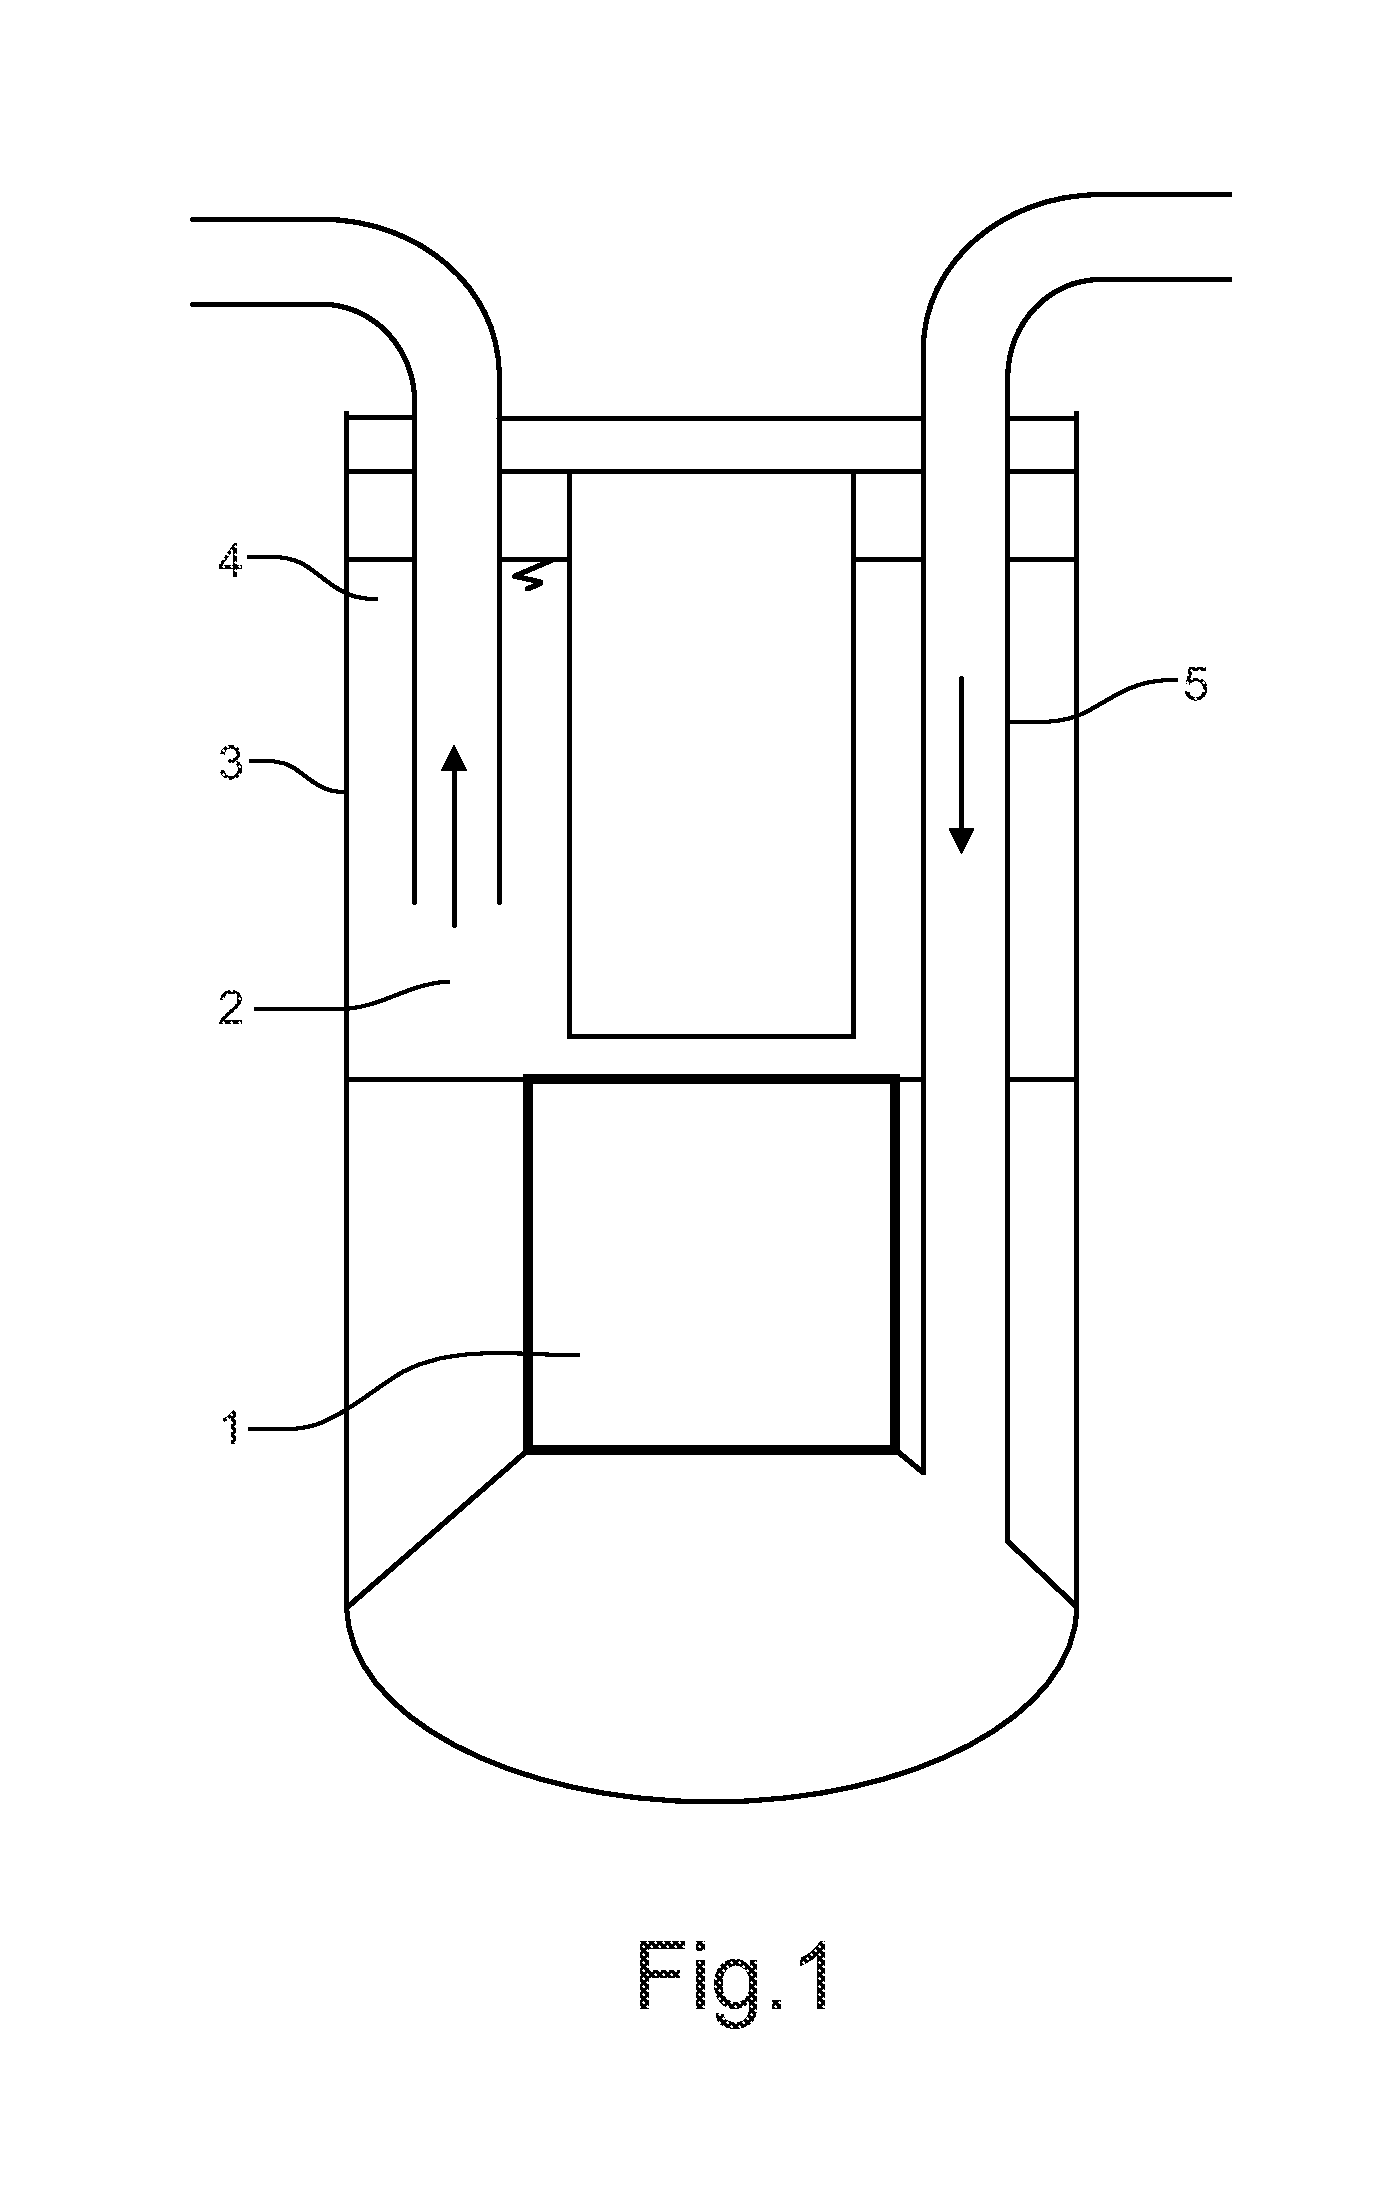 Sfr nuclear reactor of the integrated type with improved compactness and convection